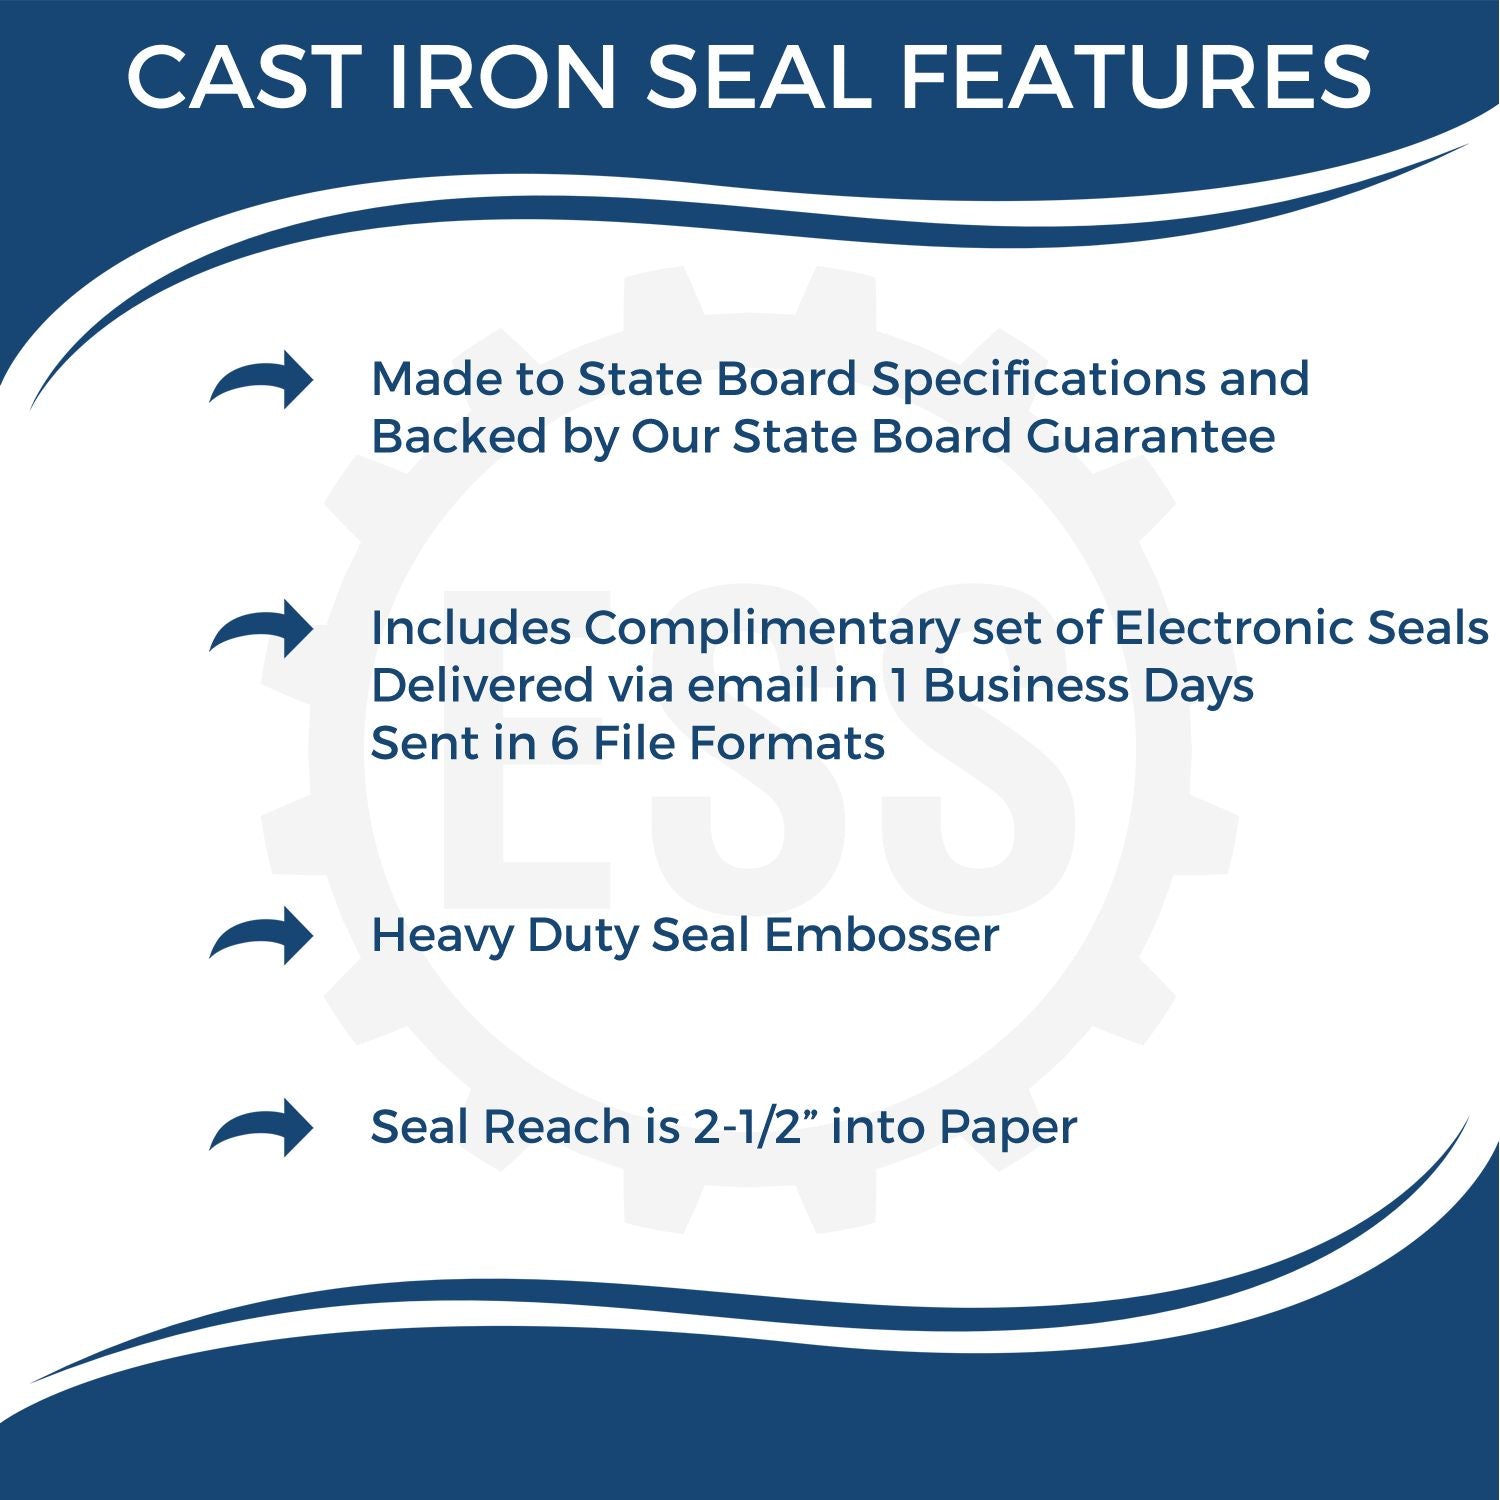 The main image for the Heavy Duty Cast Iron Missouri Engineer Seal Embosser depicting a sample of the imprint and electronic files